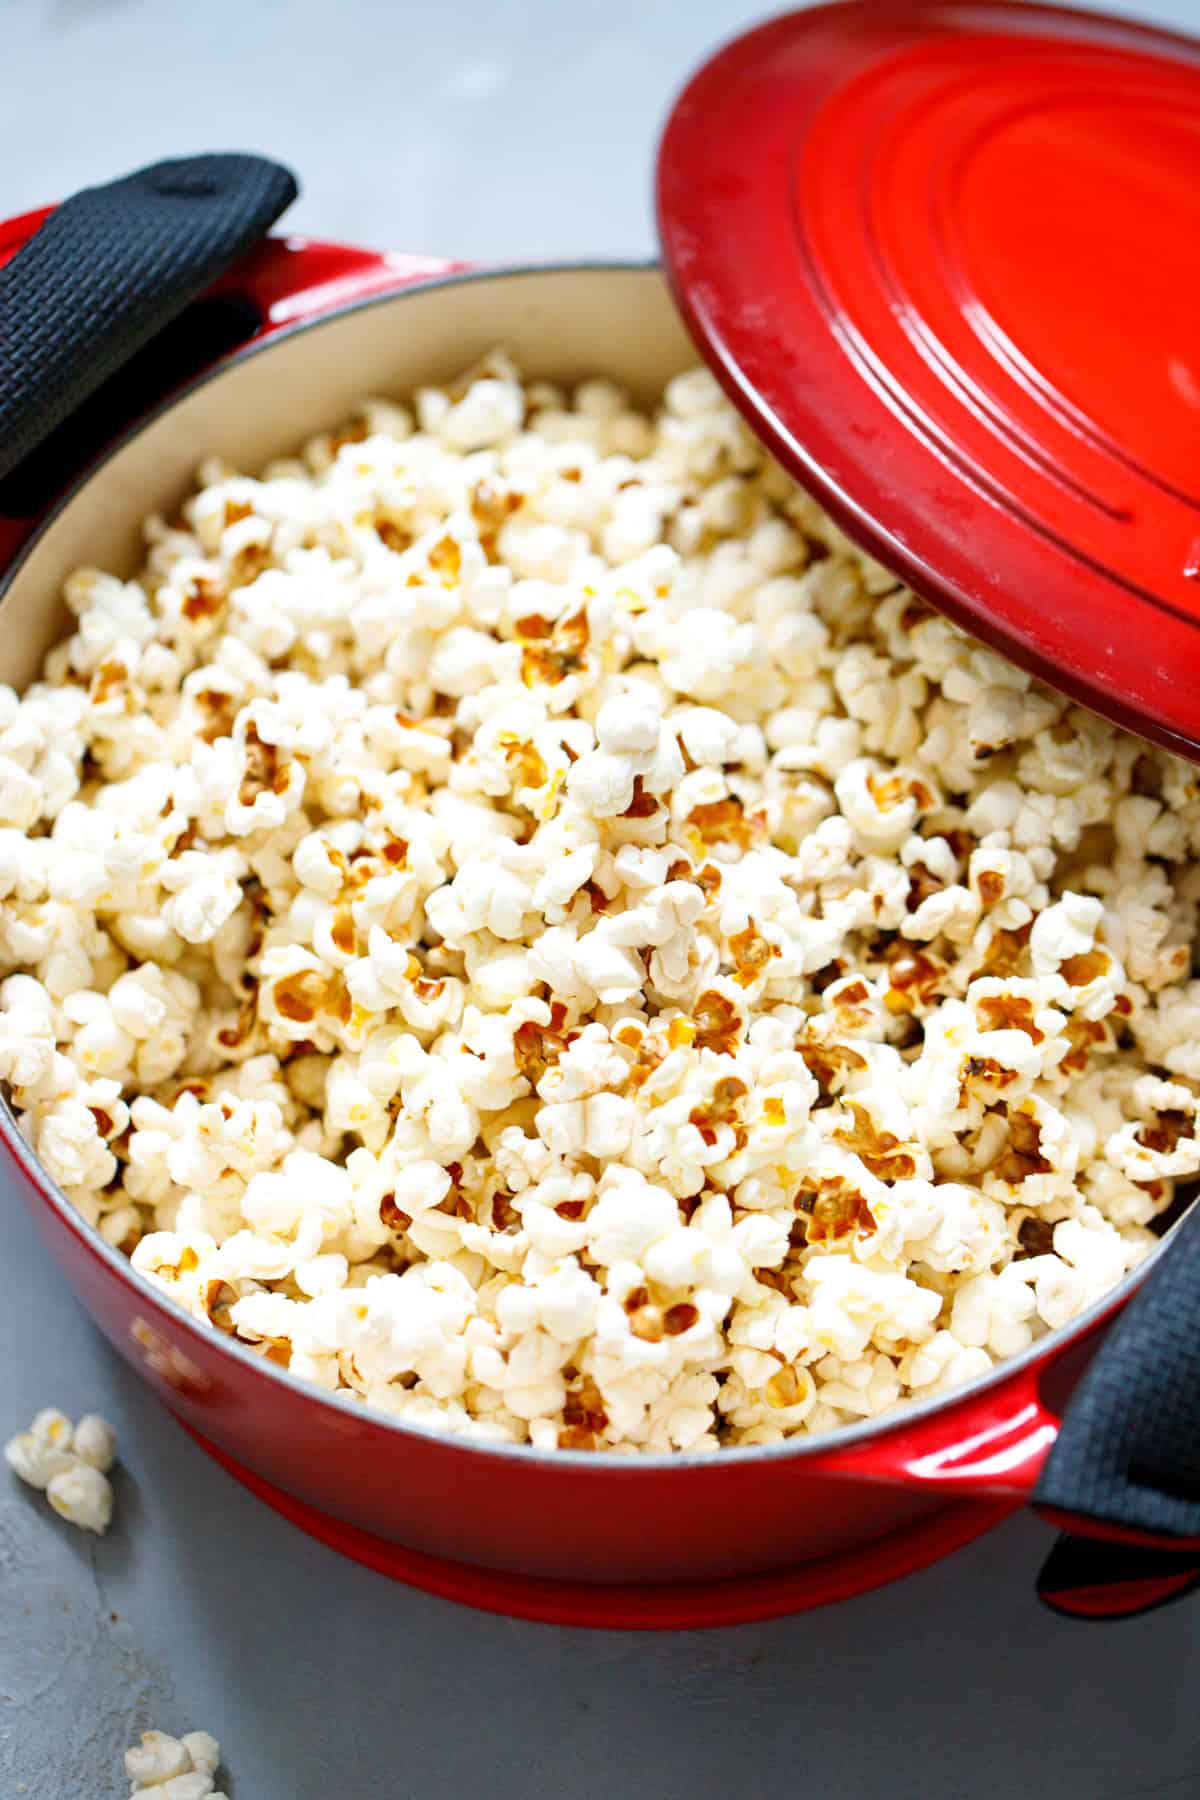 How to Make Popcorn On the Stove 